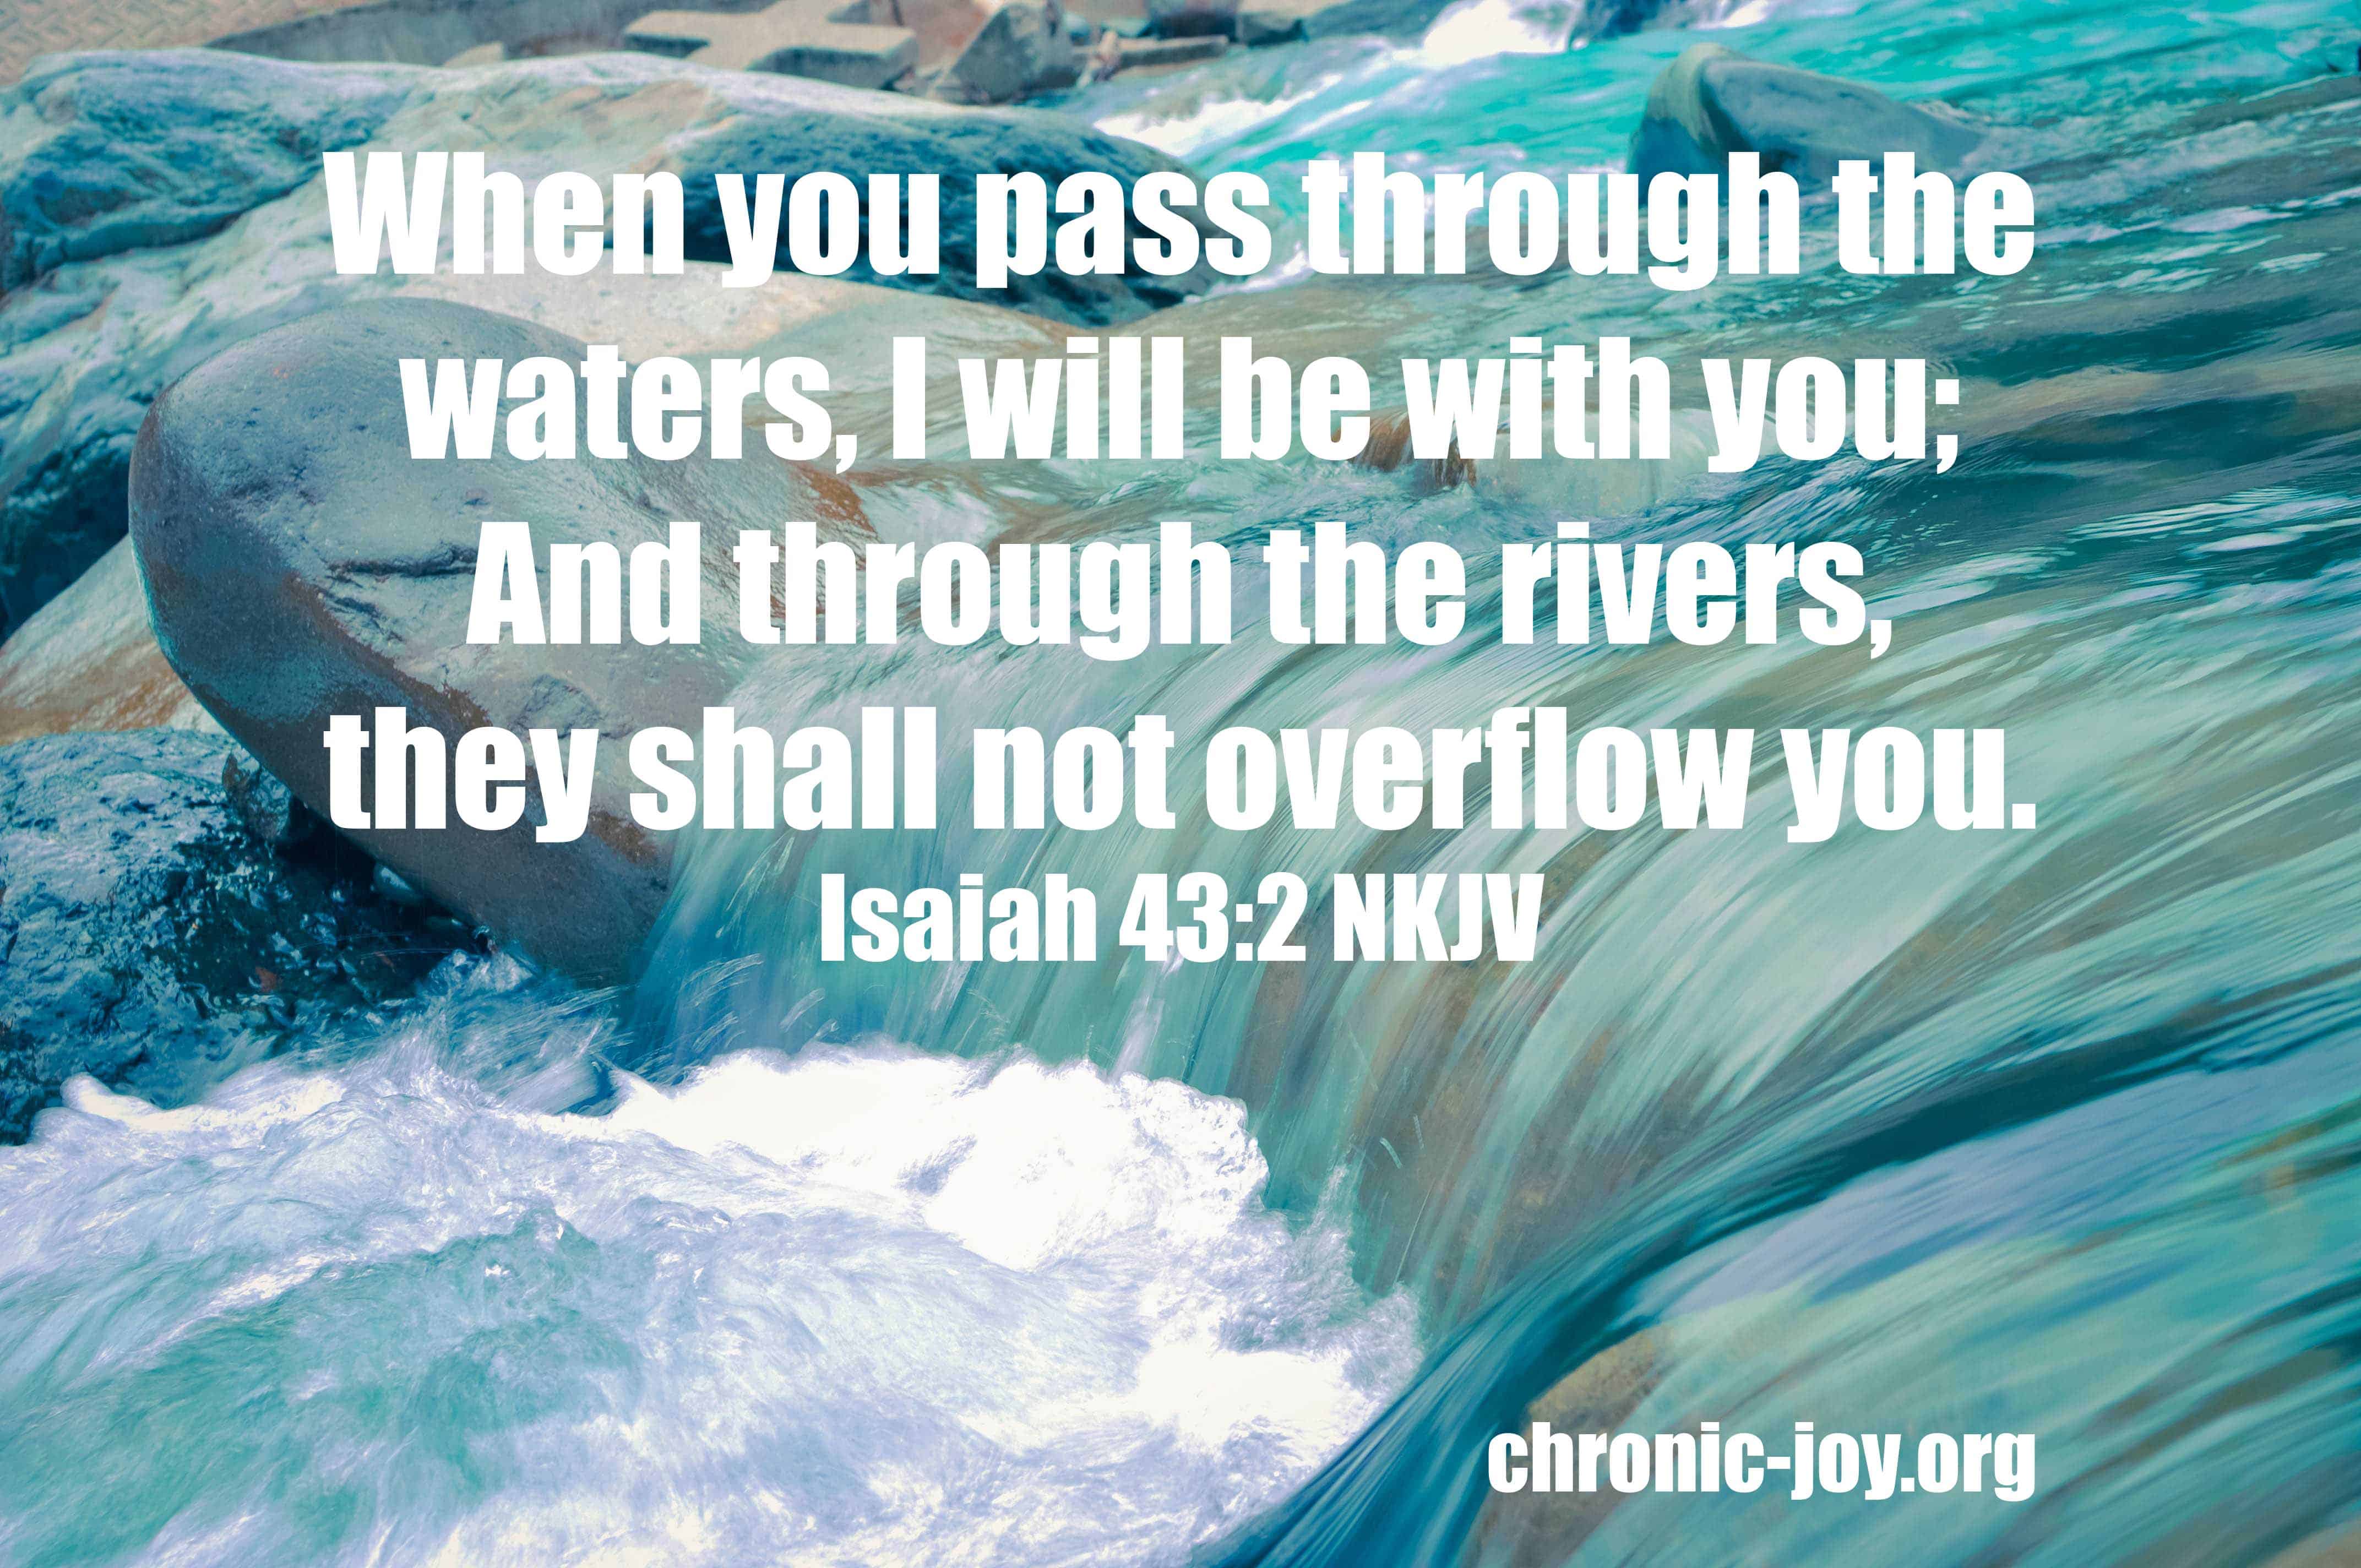 When you pass through the waters, I will be with you; And through the rivers, they shall not overflow you. Isaiah 43:2